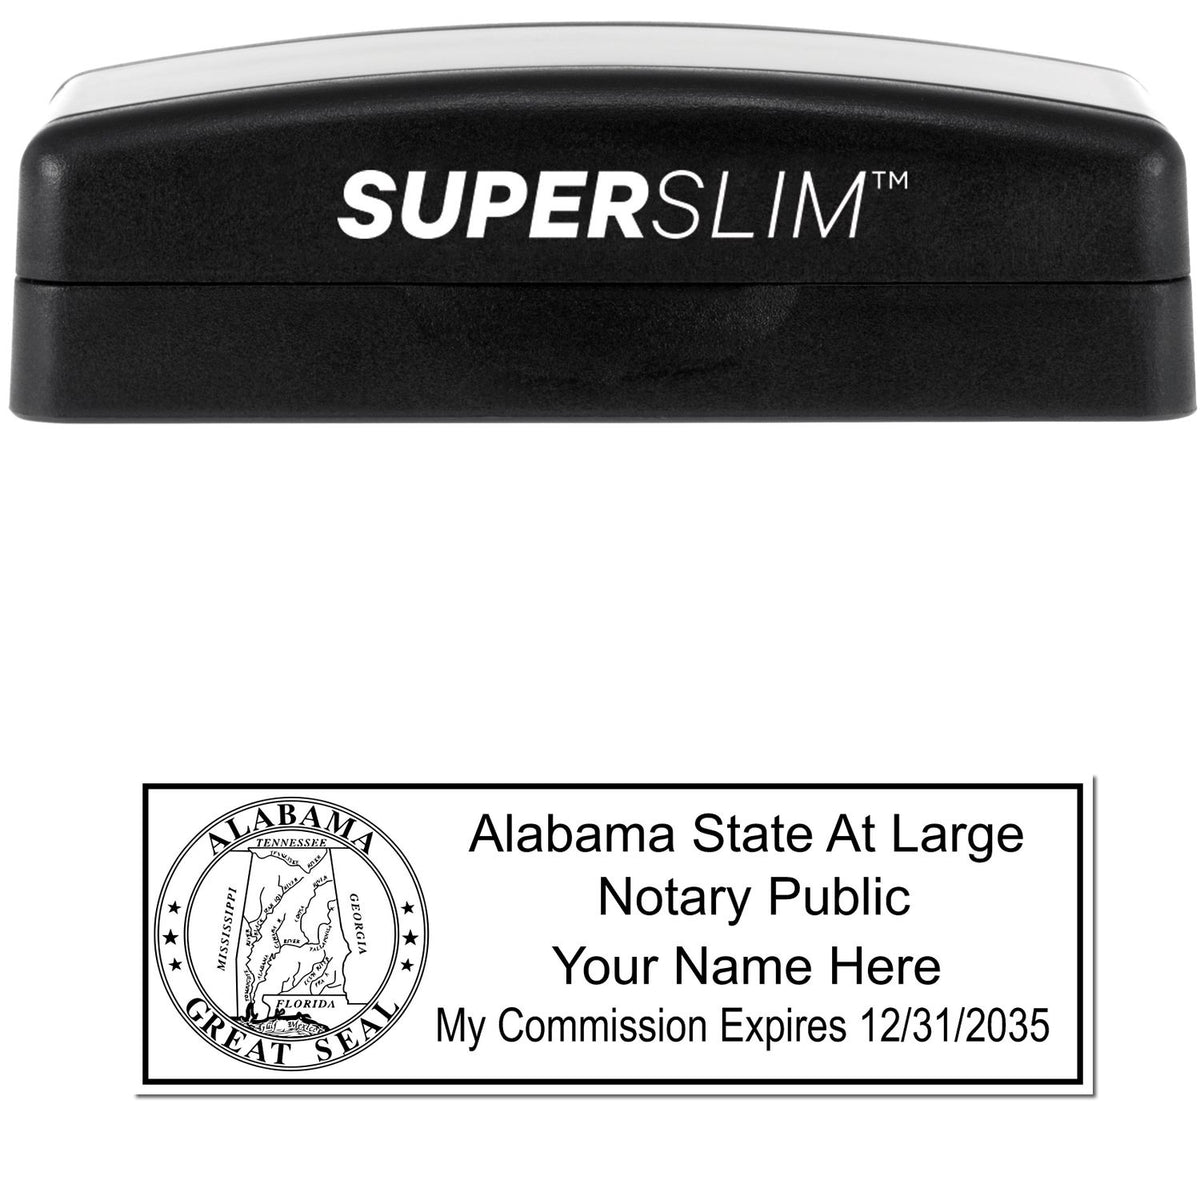 The main image for the Super Slim Alabama Notary Public Stamp depicting a sample of the imprint and electronic files